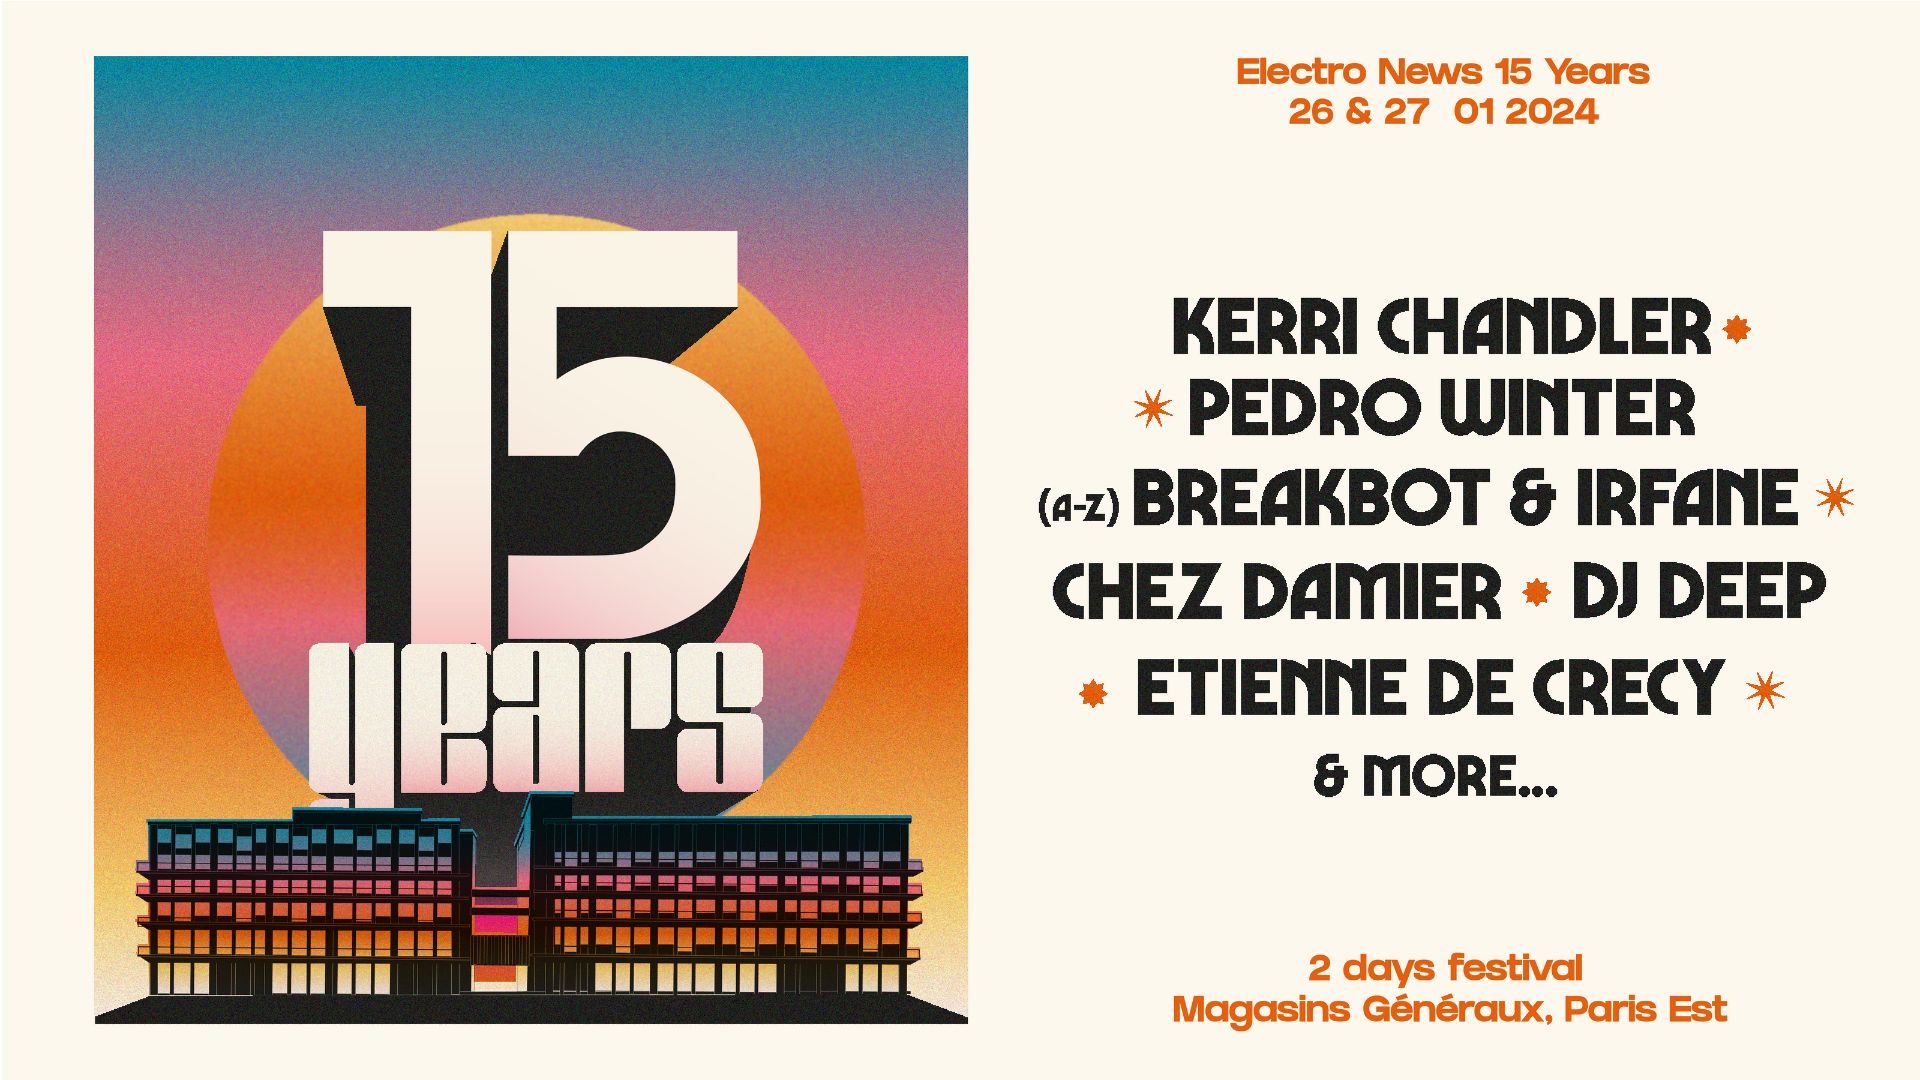 Affiche du festival Electro News 15 years